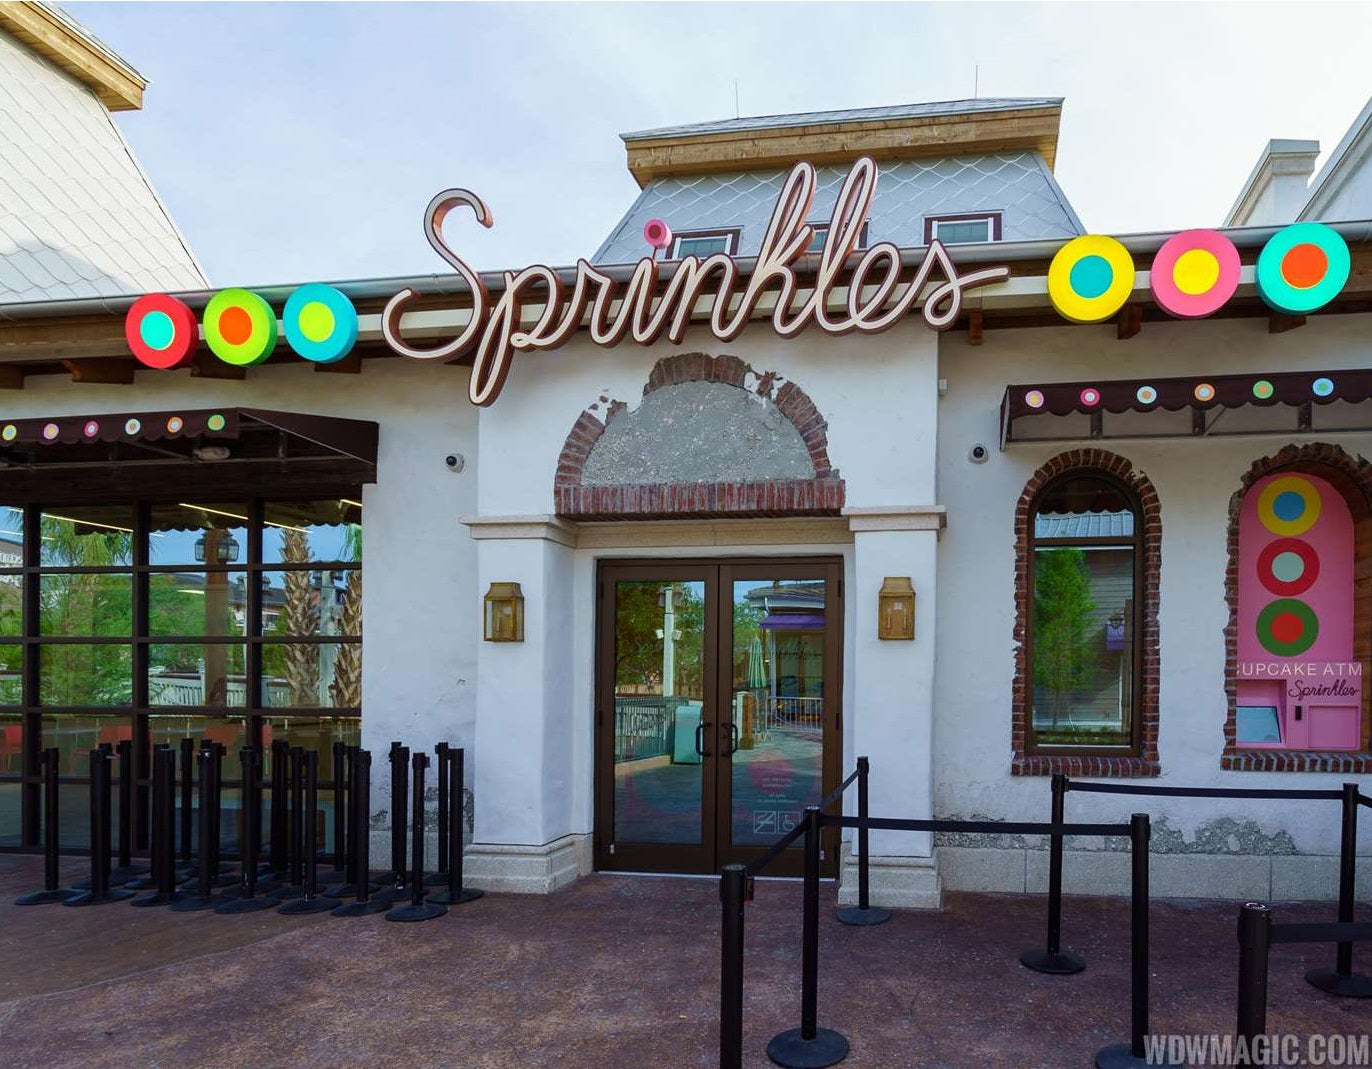 Location Disney Springs Sprinkles Nationwide Shipping